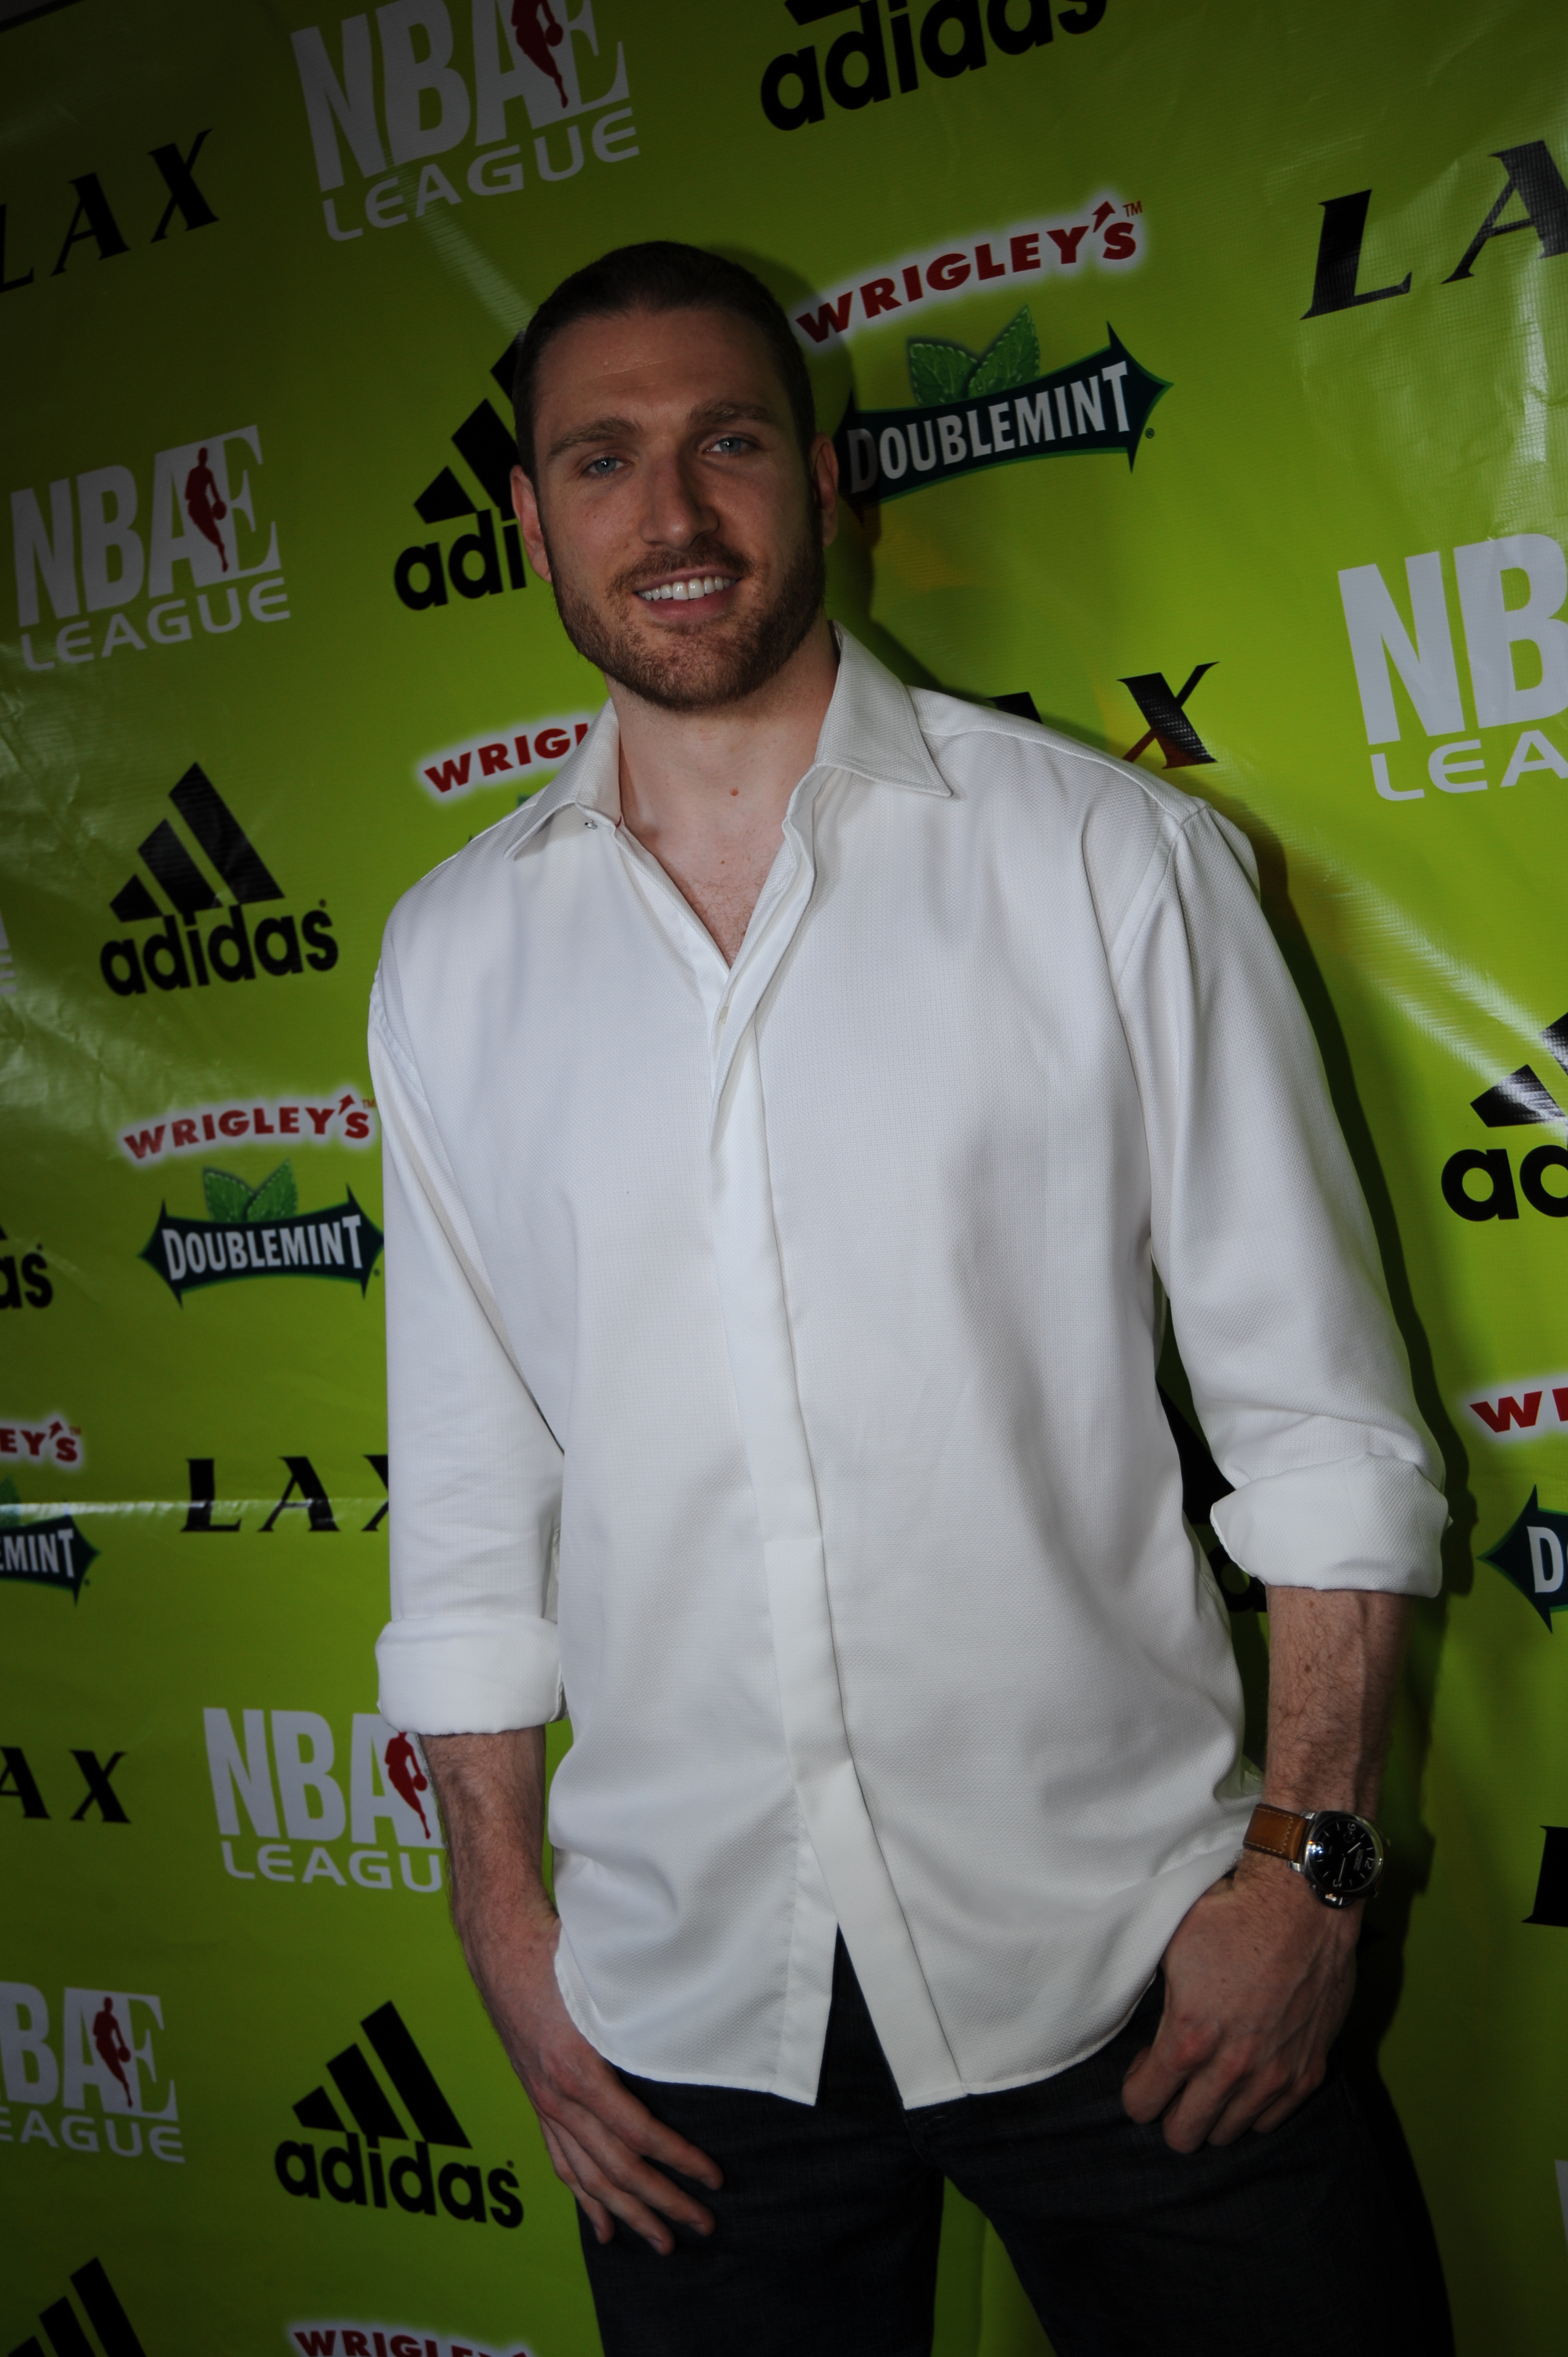 Peter Cornell arrives at the 2007-2008 NBAE League Wrap Party at LAX nightclub in Los Angeles.